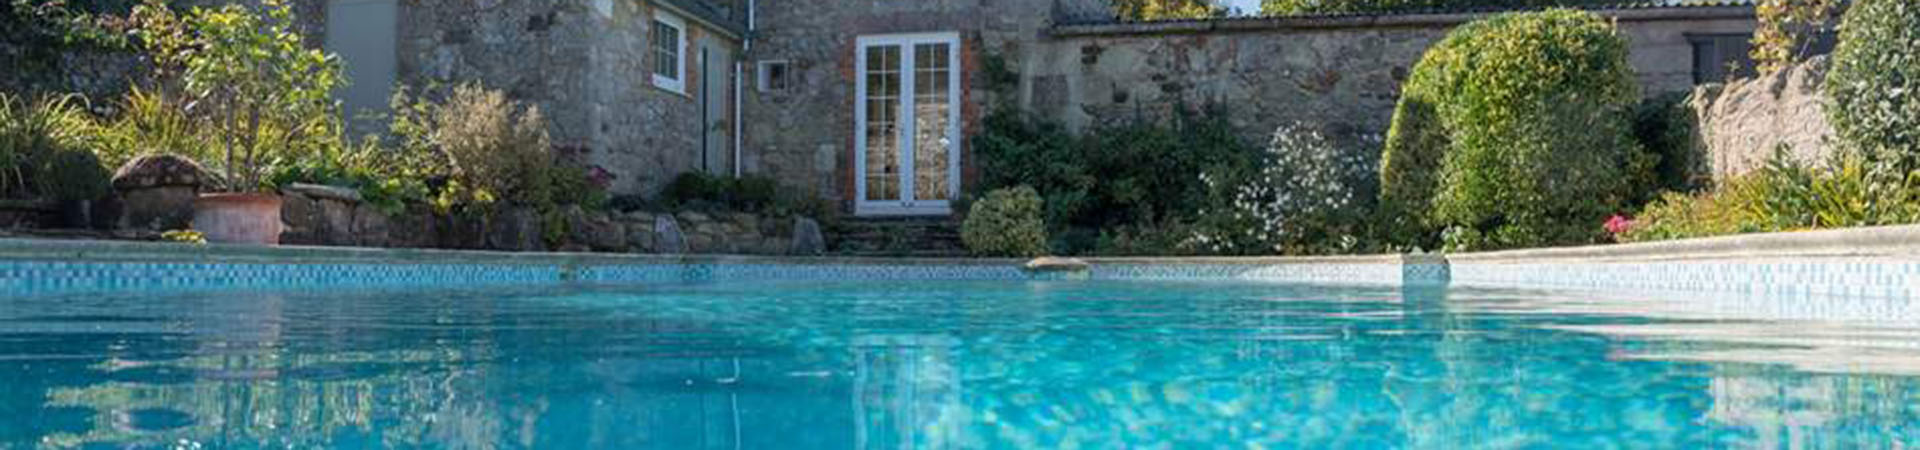 Holiday cottages with pools in Central England